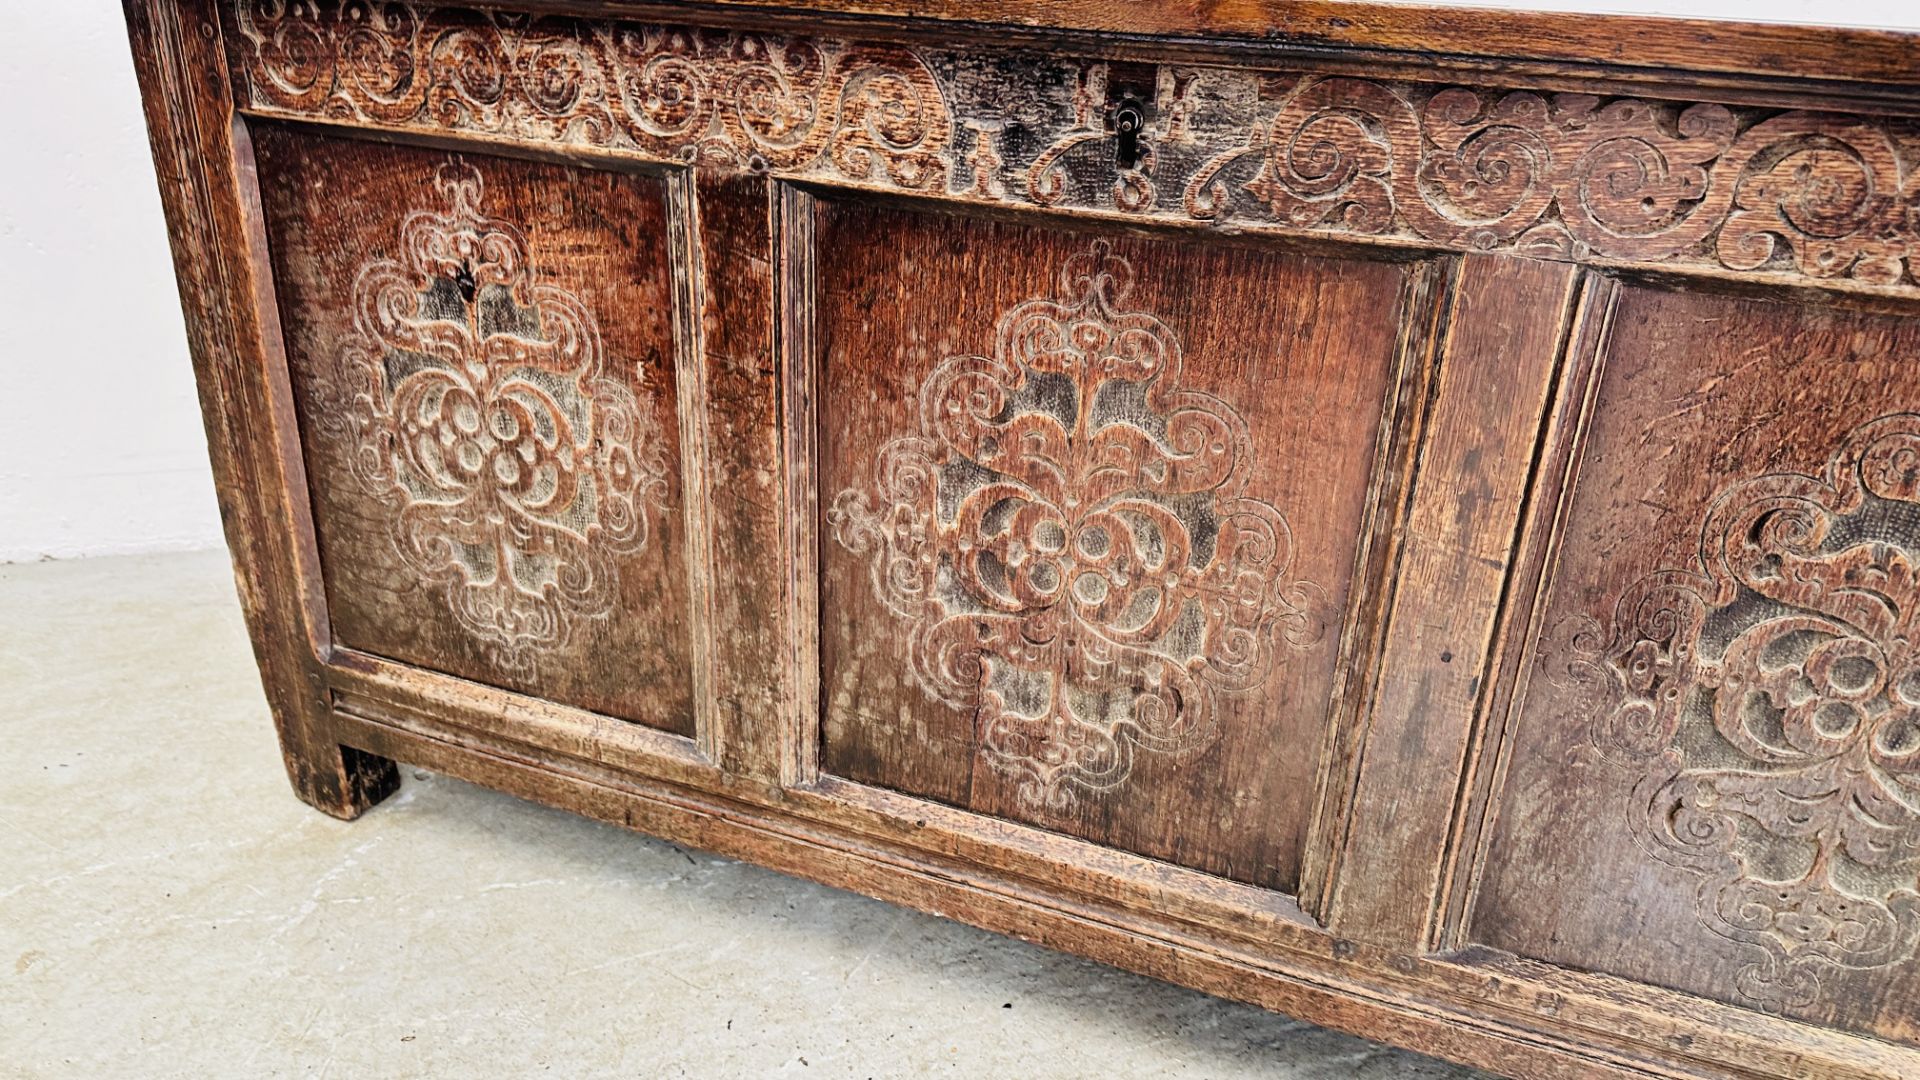 A C17th OAK COFFER, DATED 1686, WITH ALTERATIONS INCLUDING A NEW TOP, 134CM WIDE. - Image 8 of 17